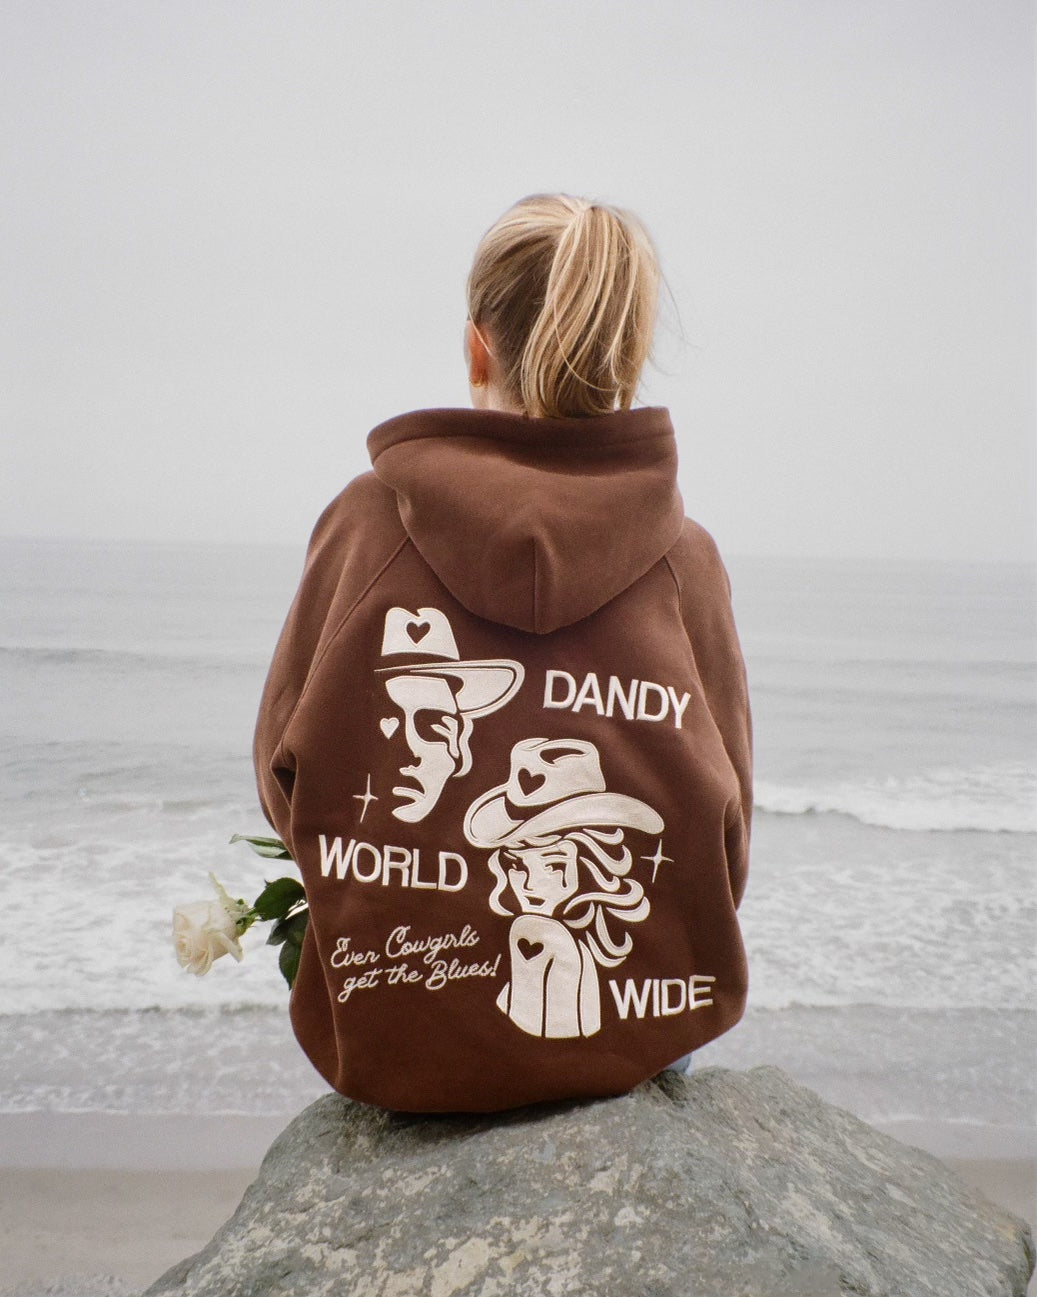 "Cowgirl" Oversized Lux Hoodie in Brown